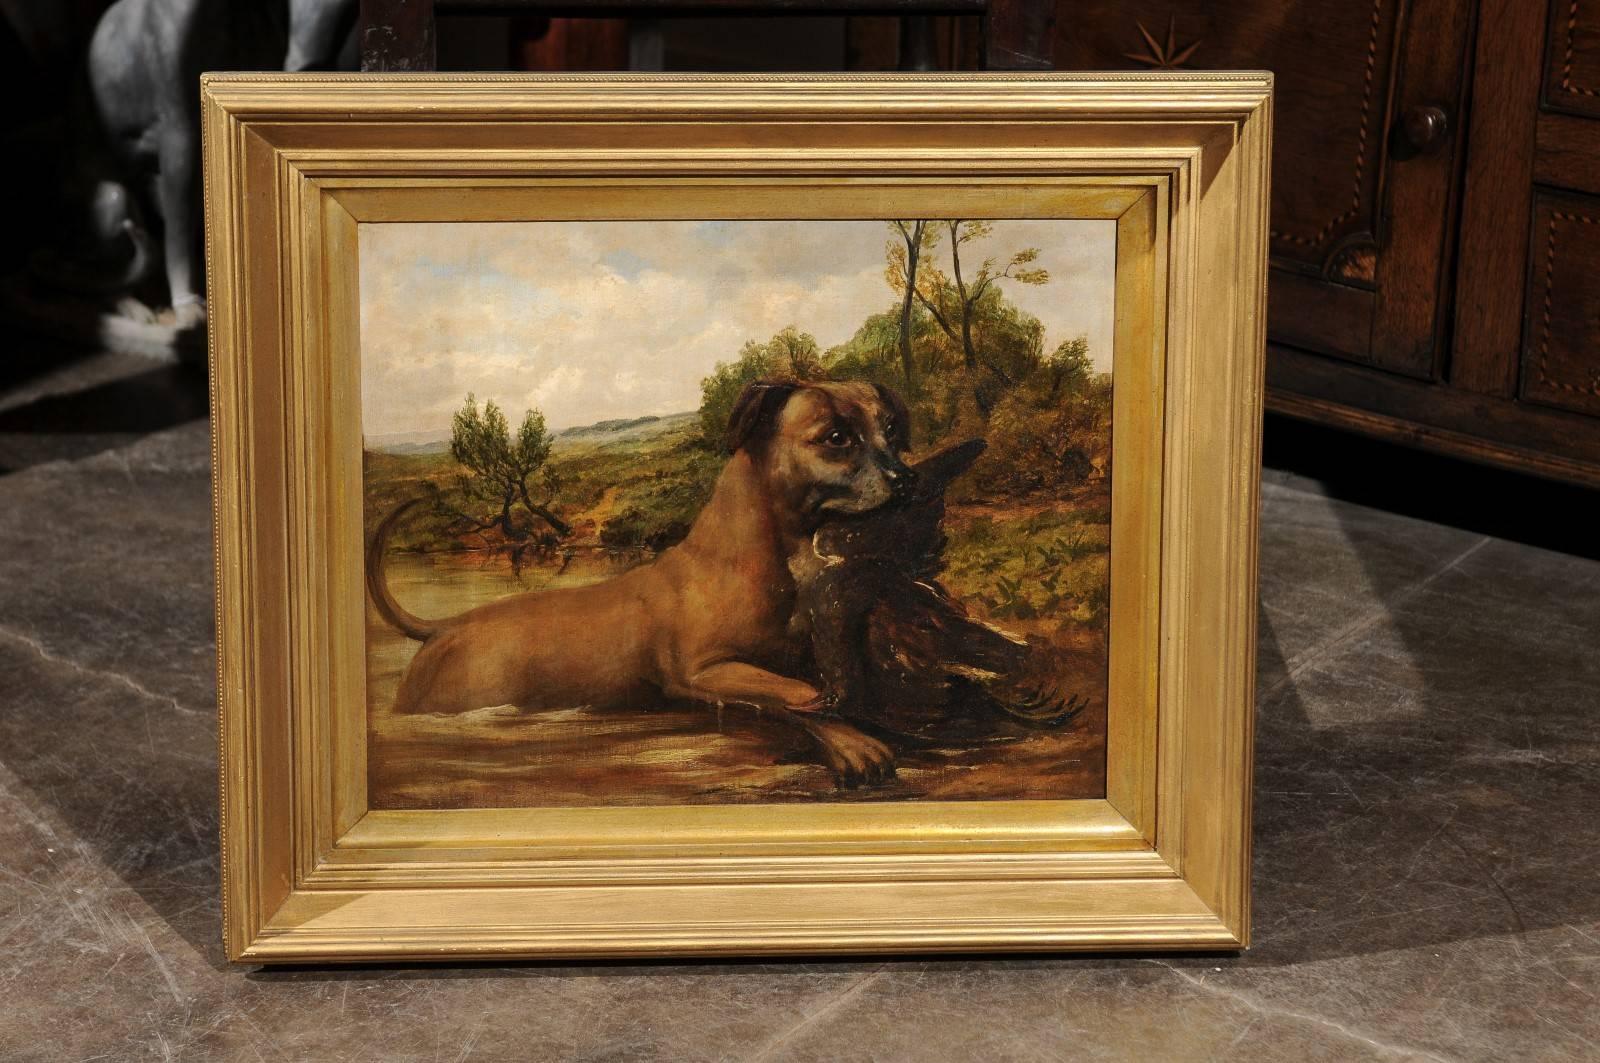 This pair of English oil paintings features two dogs placed in a country setting. The painting on the left depicts a water retrieving dog with a prey in his mouth. This hunting scene is focused on the dog whose tail exudes self-confidence for a job